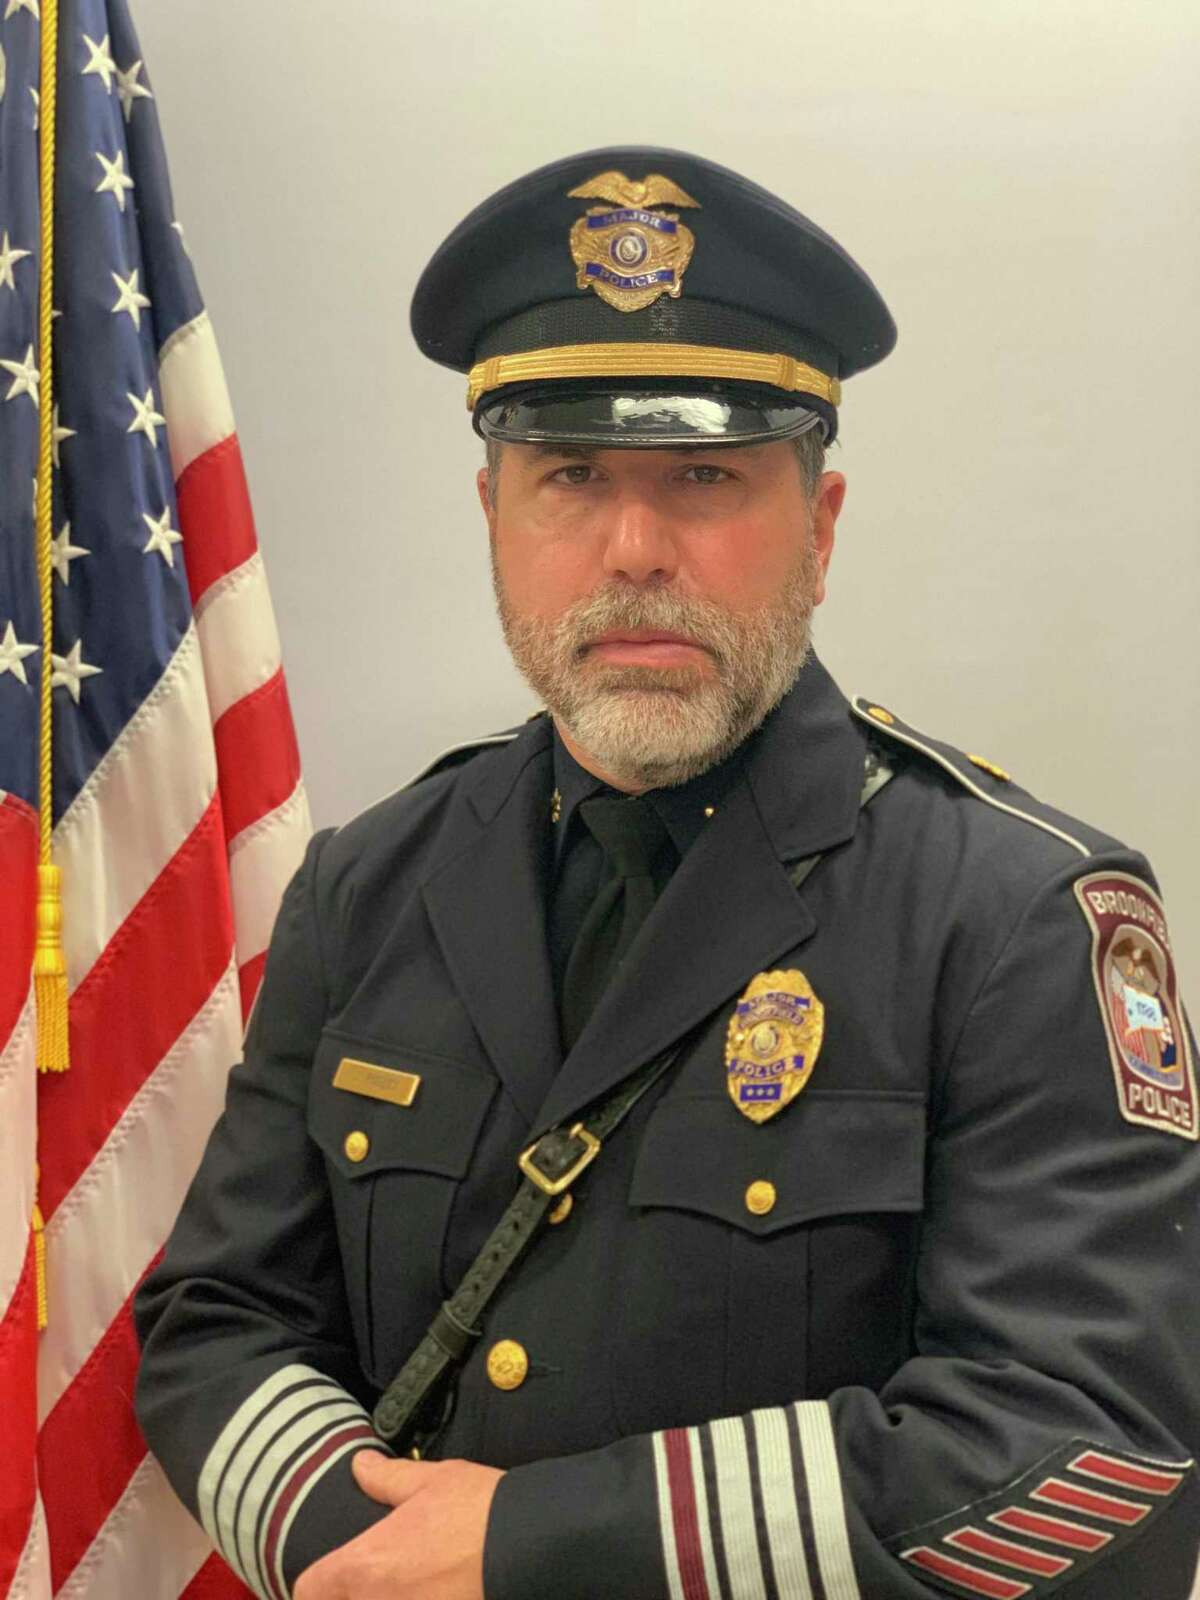 Brookfield's new police chief, John Puglisi, will take over from Chief Jay Purcell in February, 2022. Puglisi has been with the Brookfield Police Department for more than three decades.